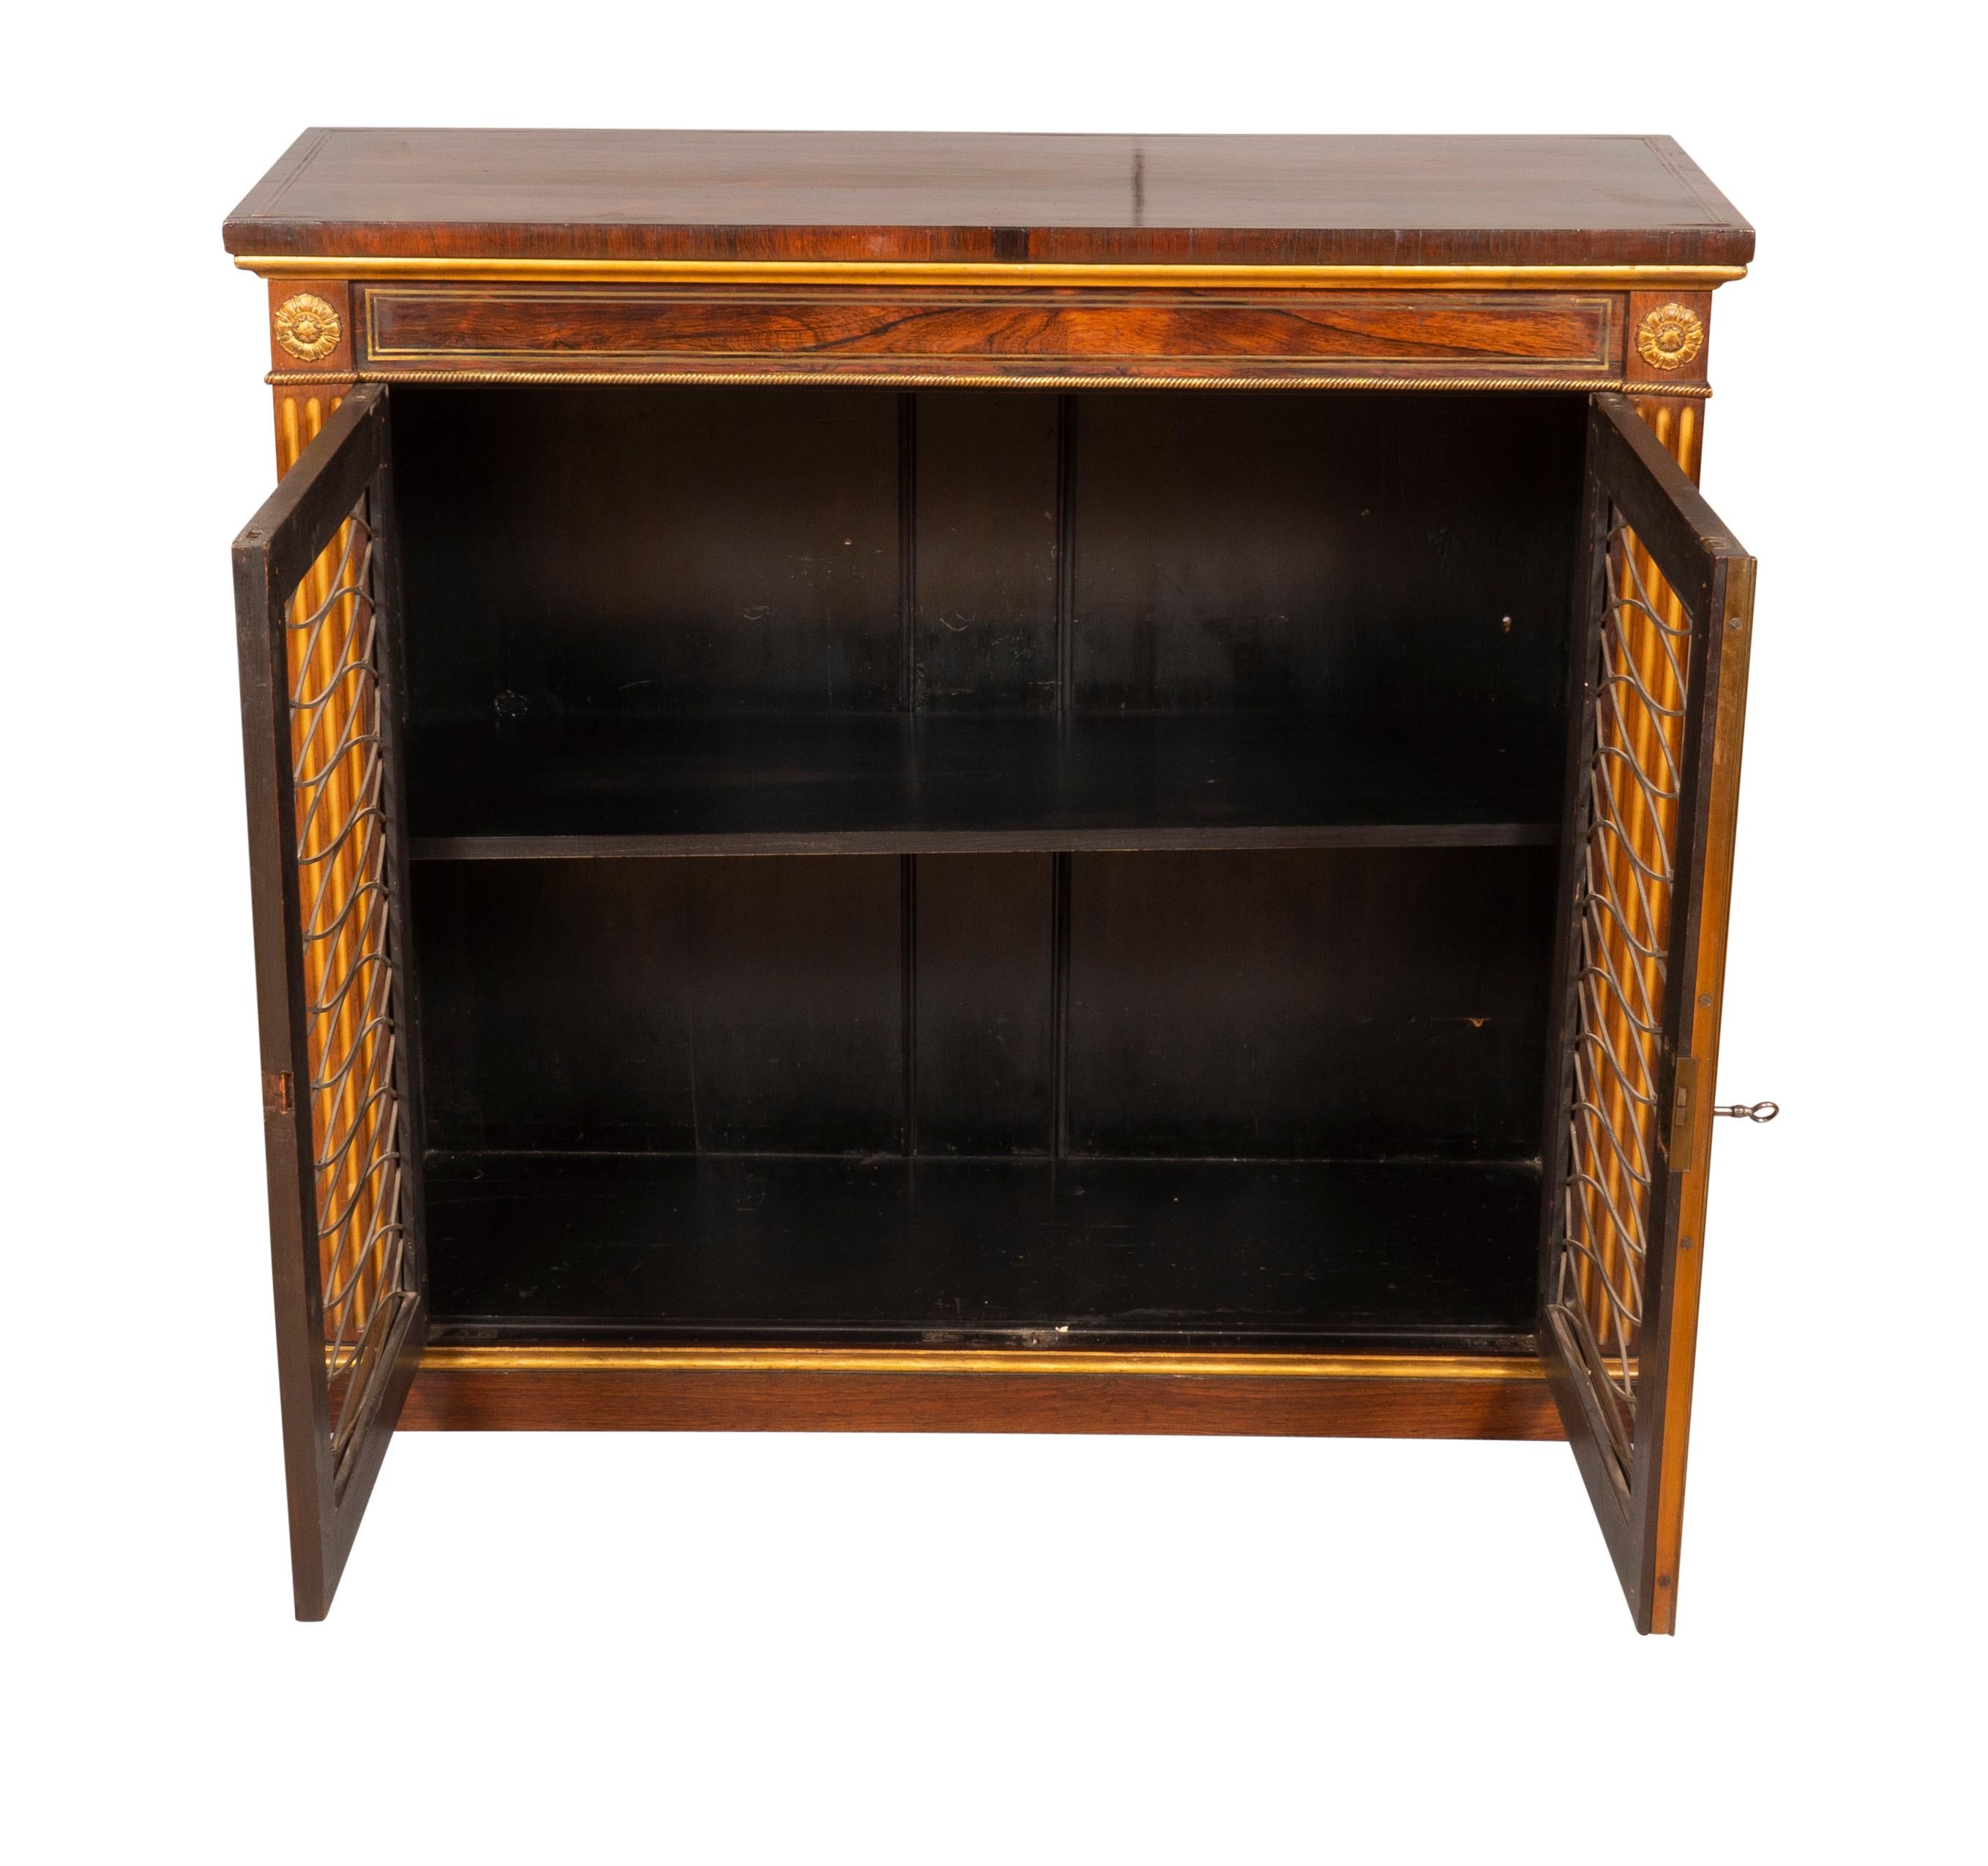 Early 19th Century Regency Rosewood Brass Inlaid and Gilded Credenza For Sale